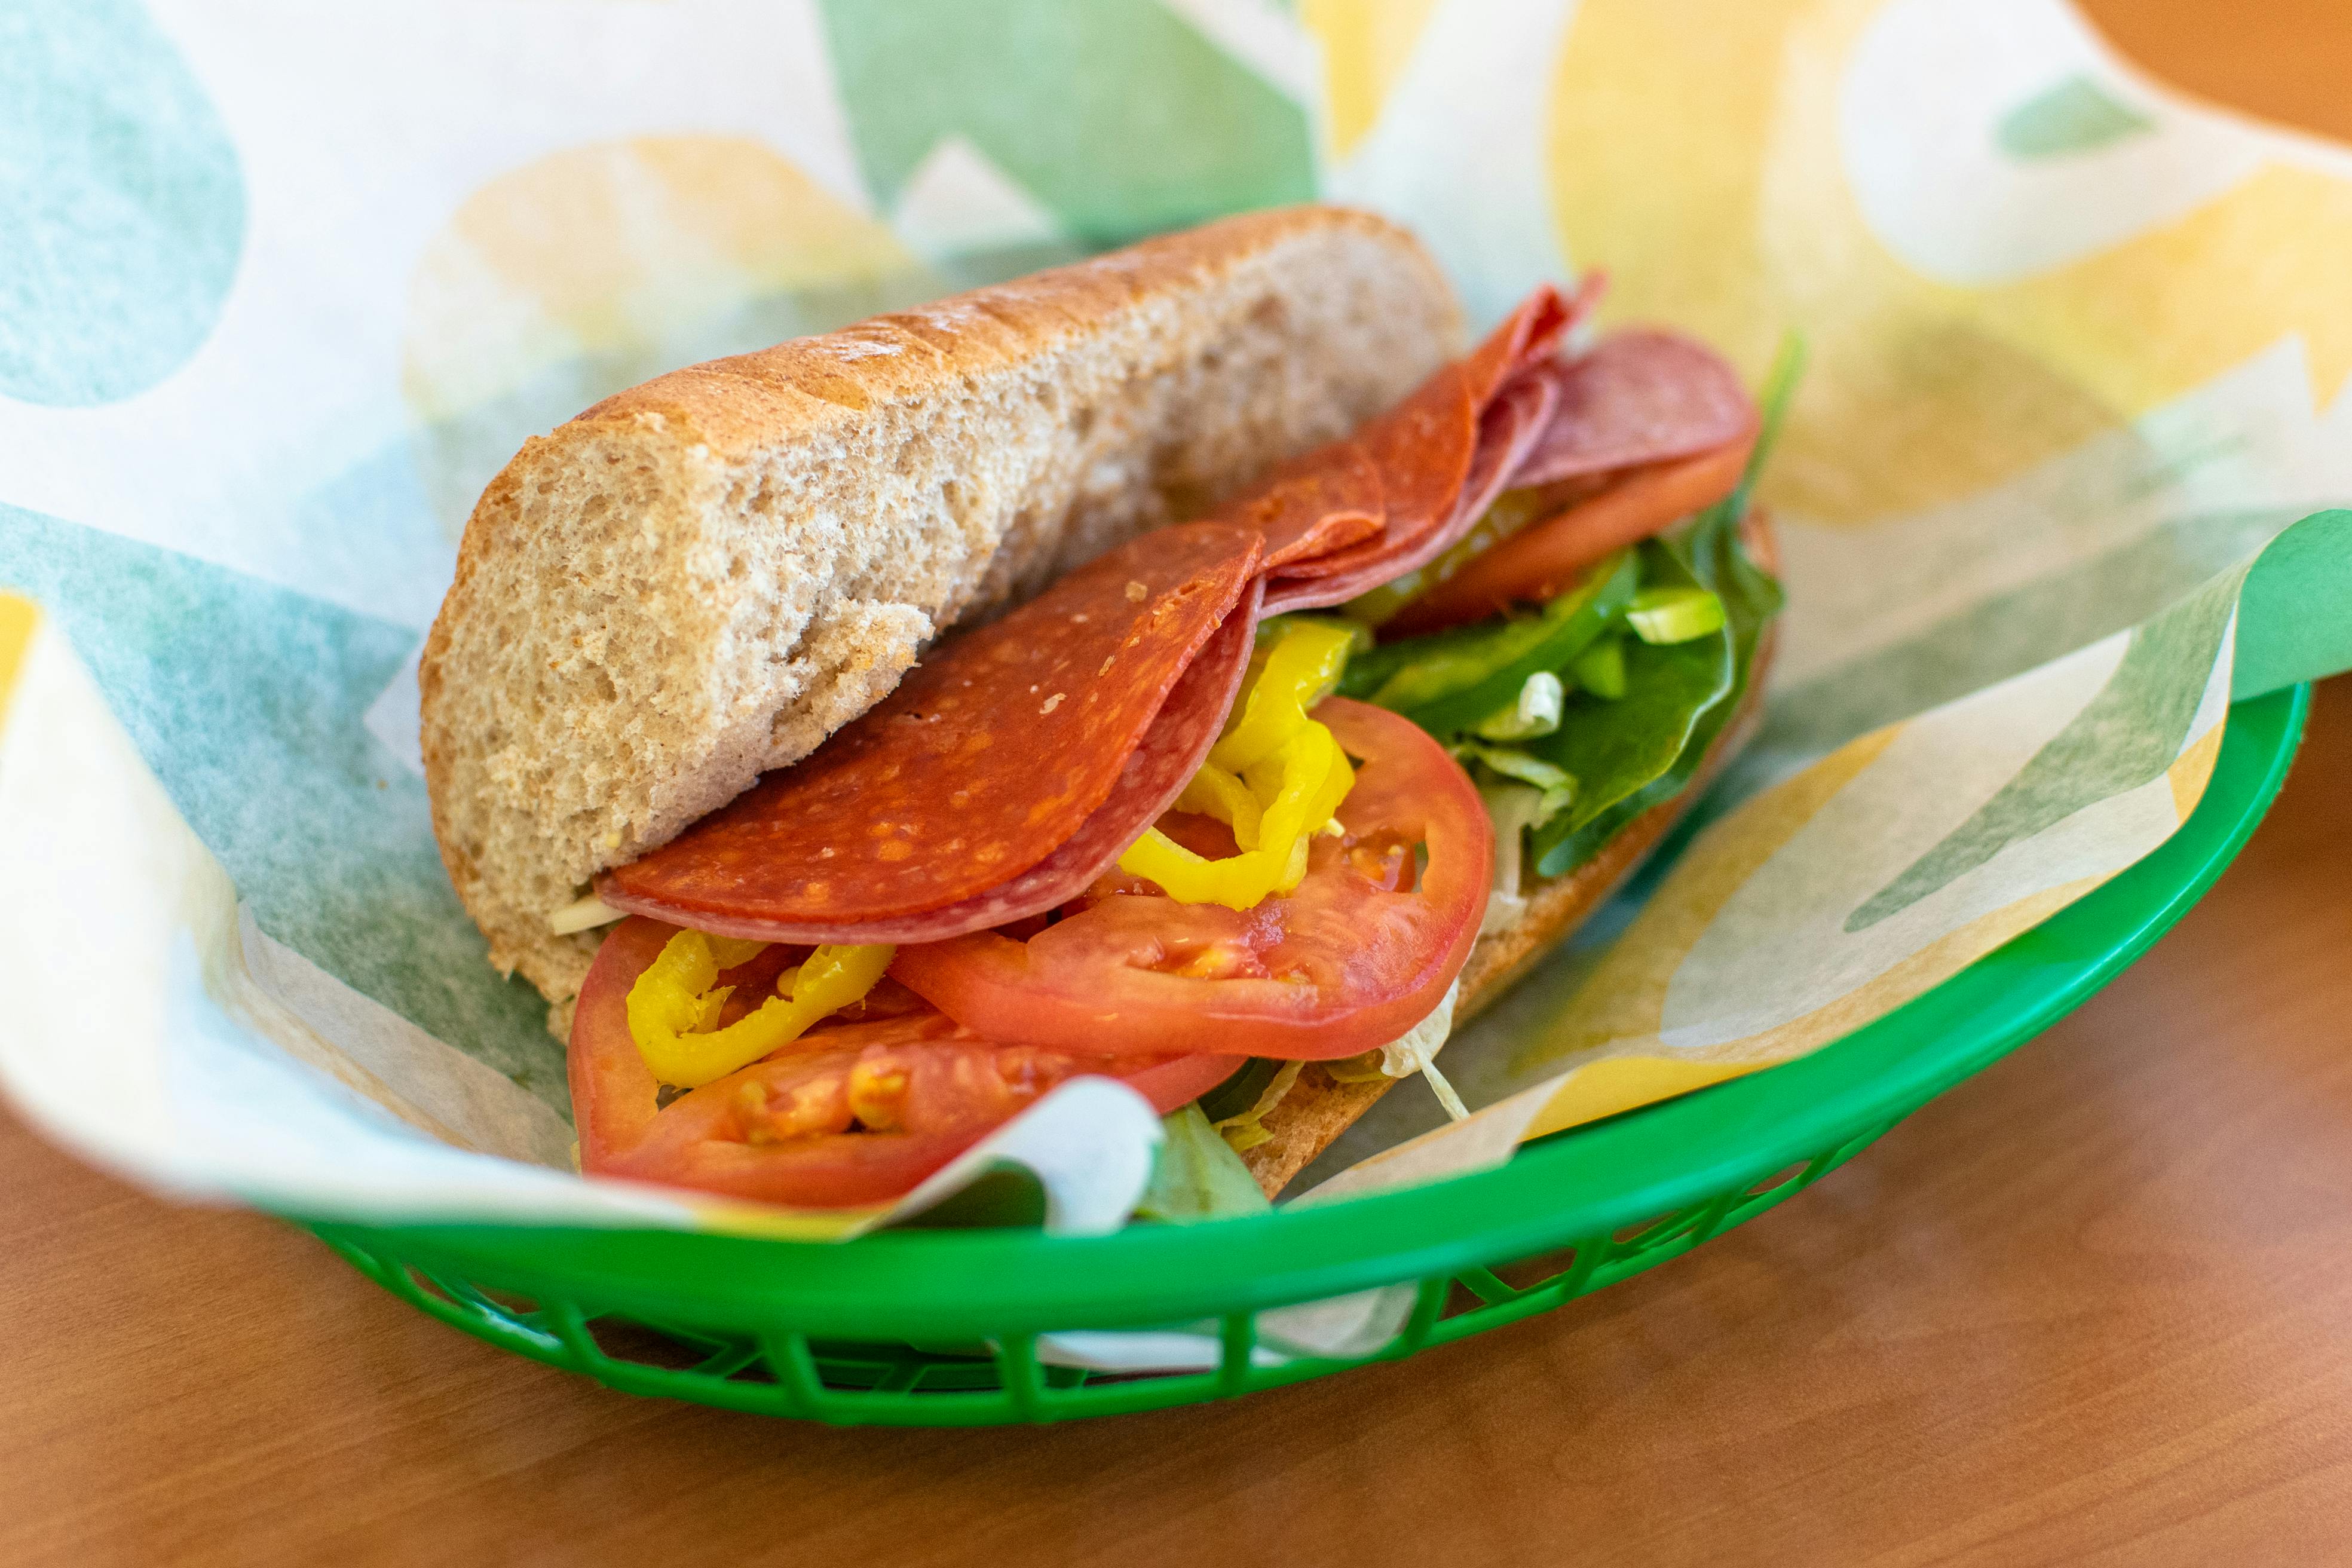 Subway - 1101 S 10th St in Manitowoc - Highlight